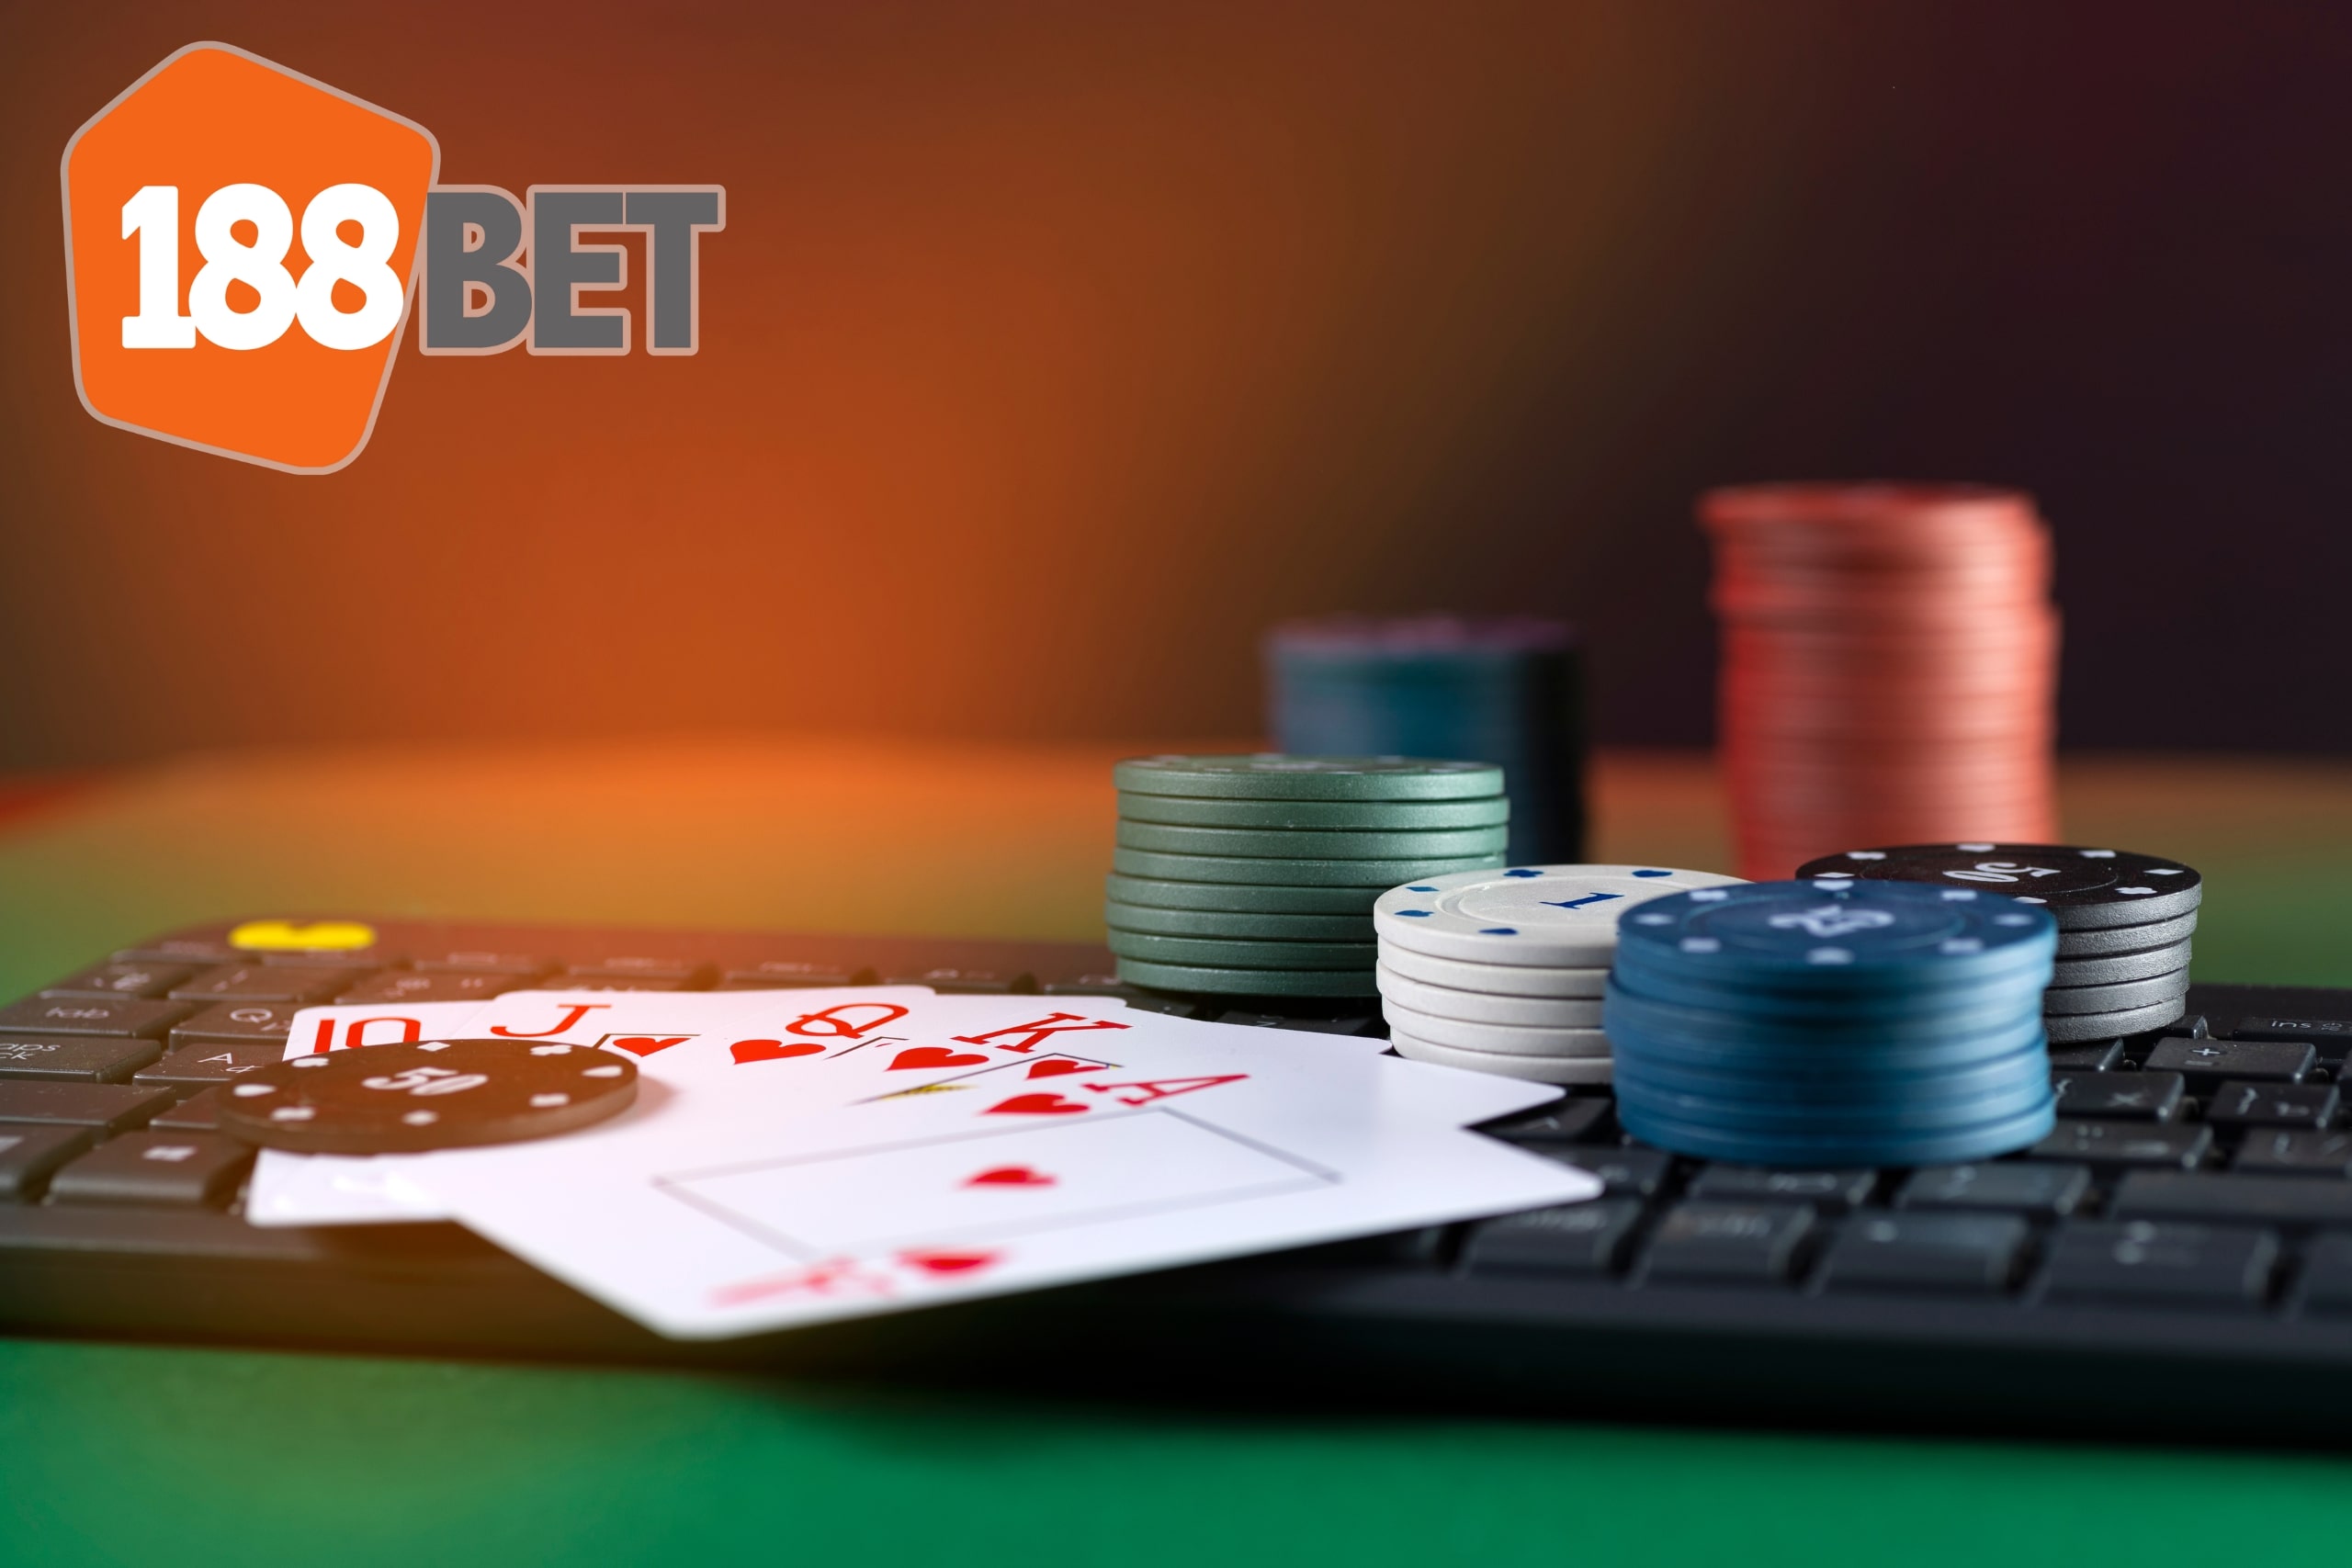 Why PG Slot Is The Top Choice For Online Gamblers